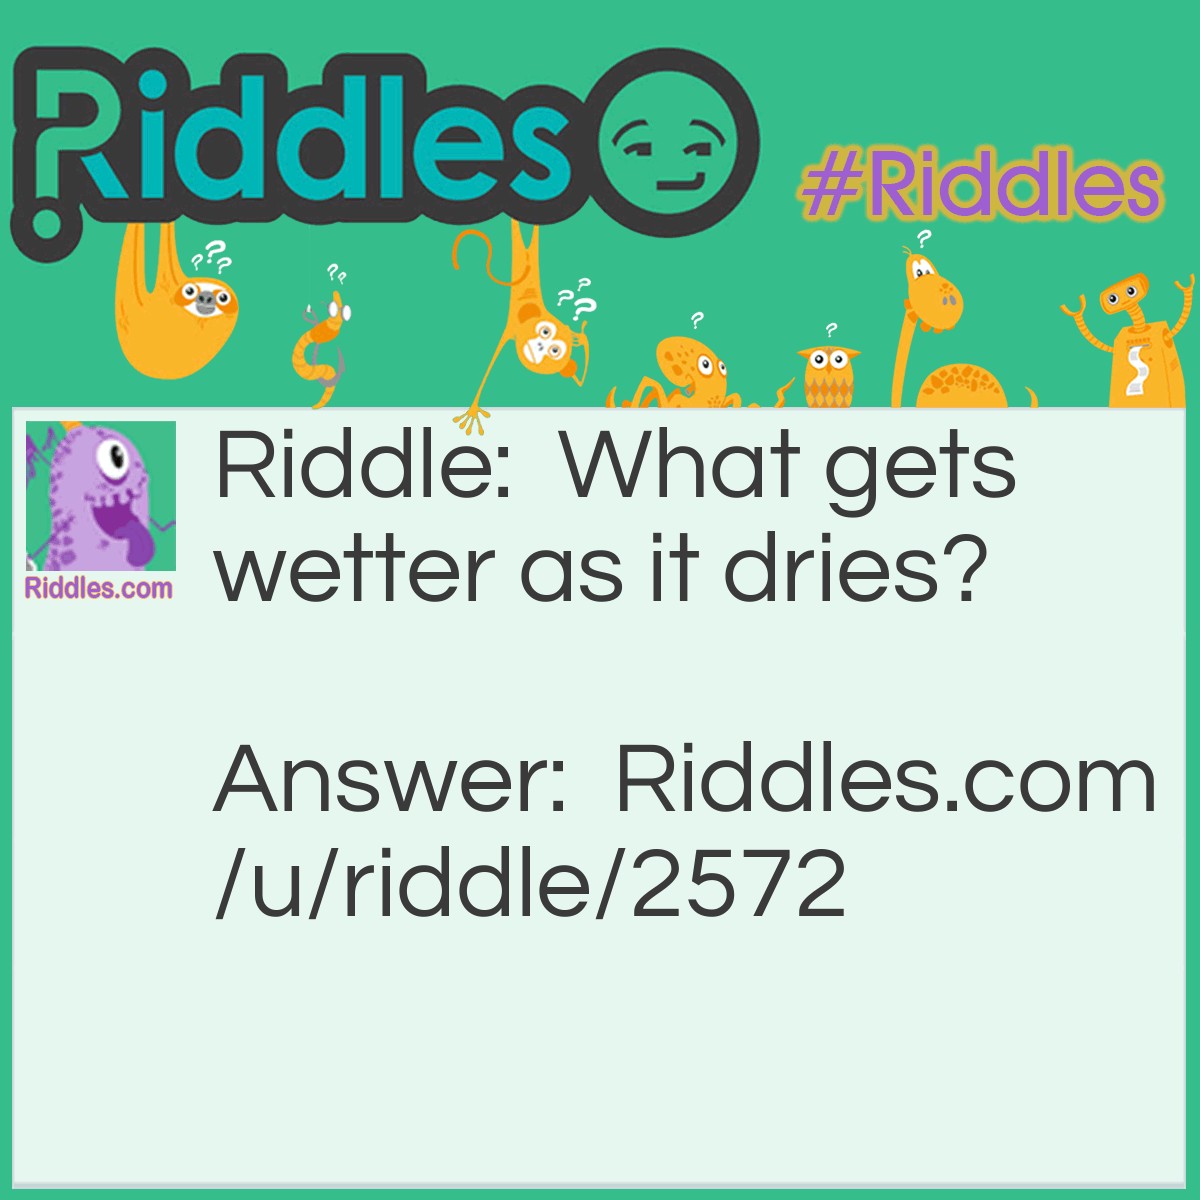 Riddle: What gets wetter as it dries? Answer: A towel.